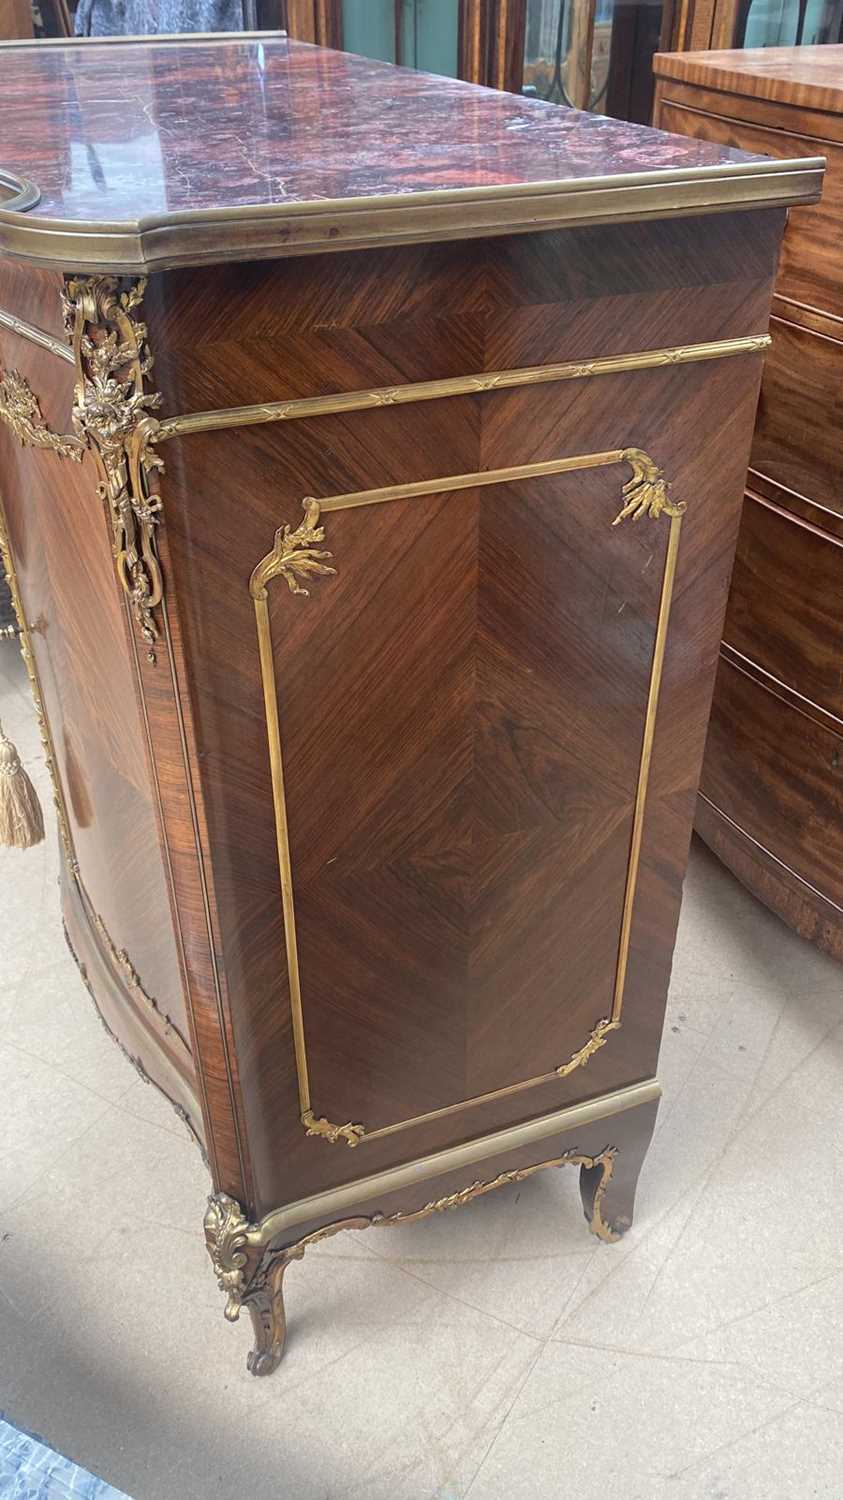 A LATE 19TH CENTURY FRENCH KINGWOOD AND OMROLU MOUNTED CABINET - Image 5 of 11